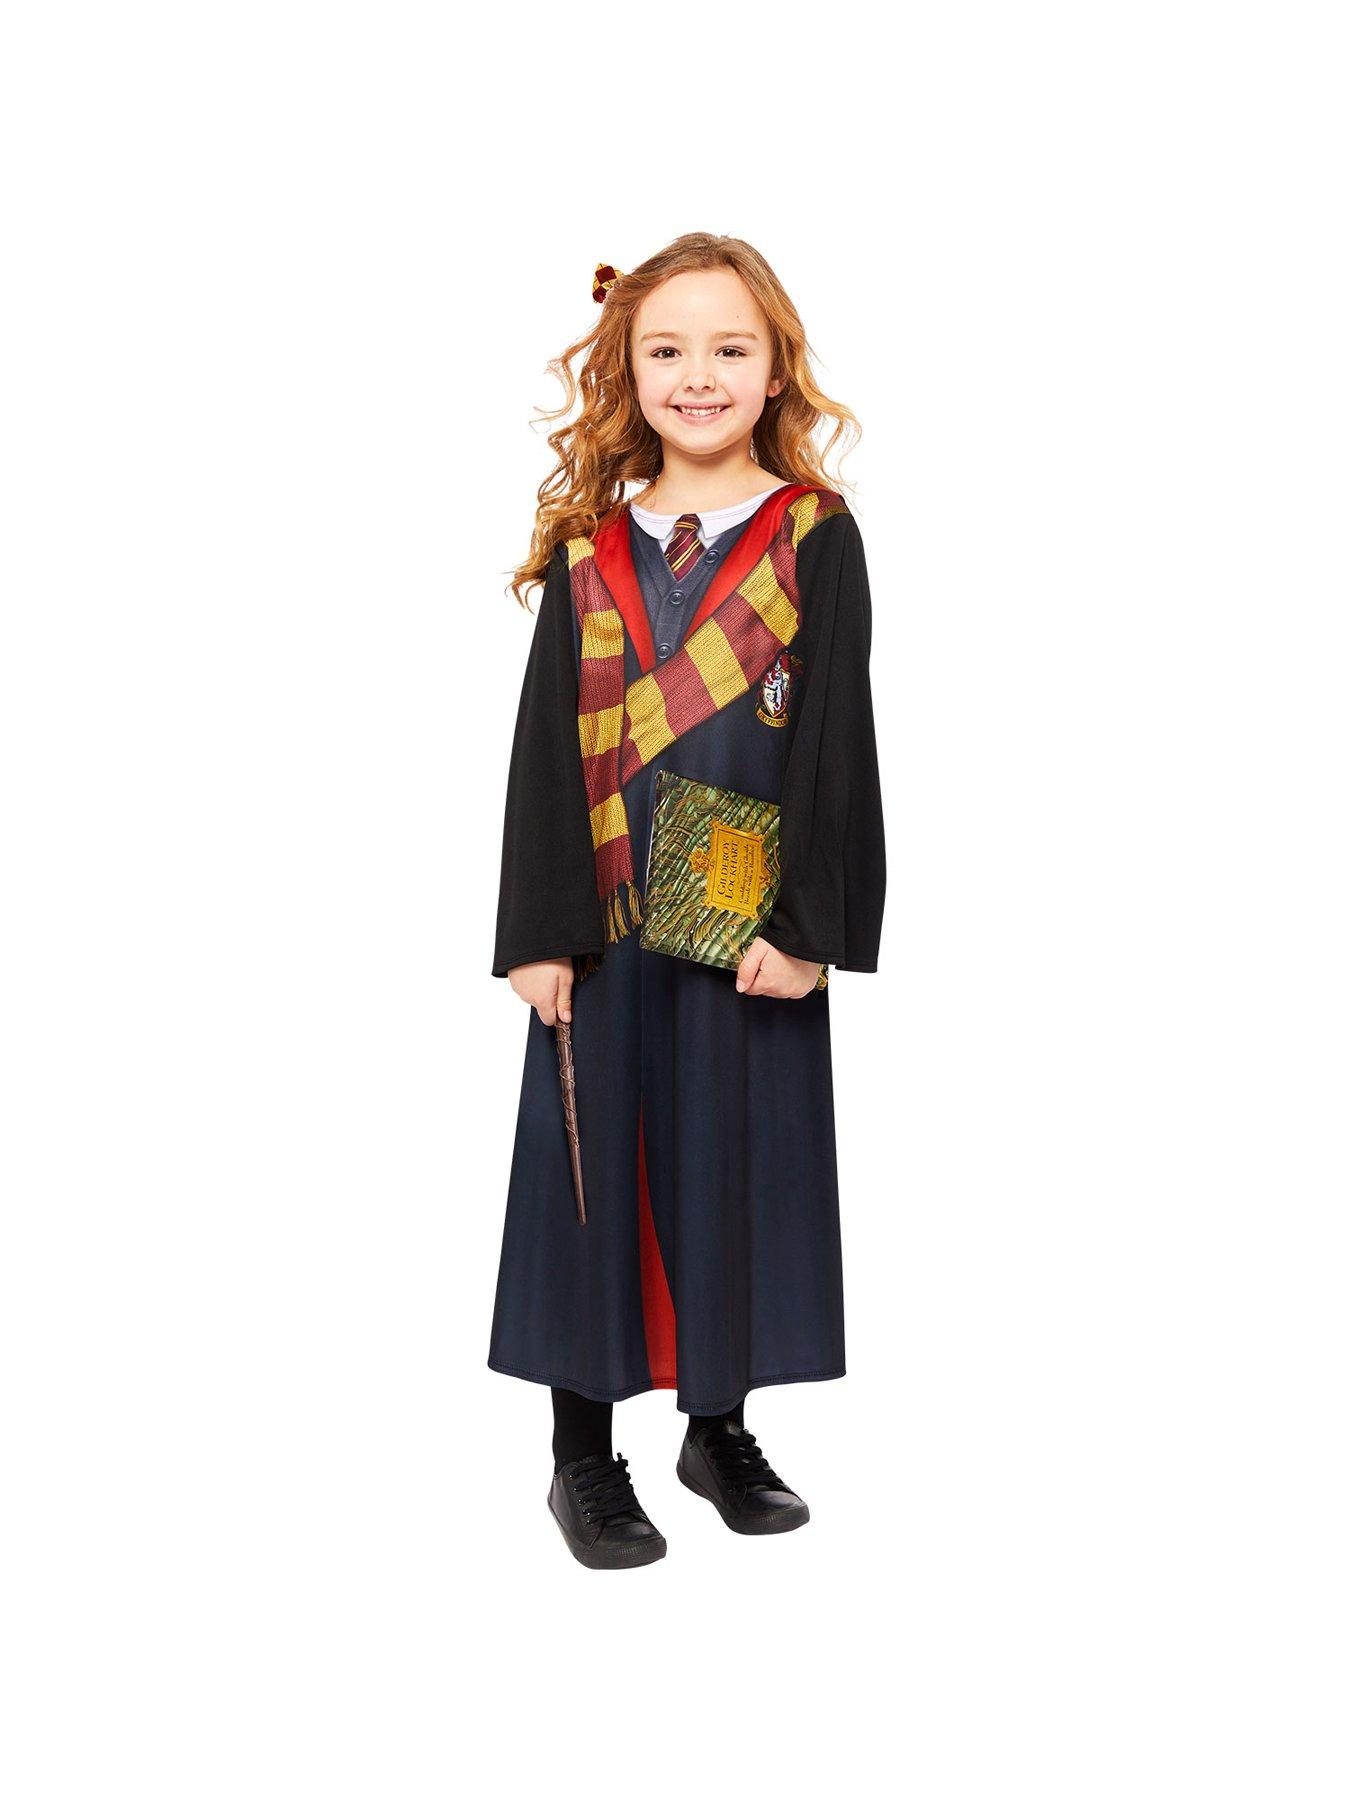 Harry Potter Character Costumes in Supporting Roles - Parties With